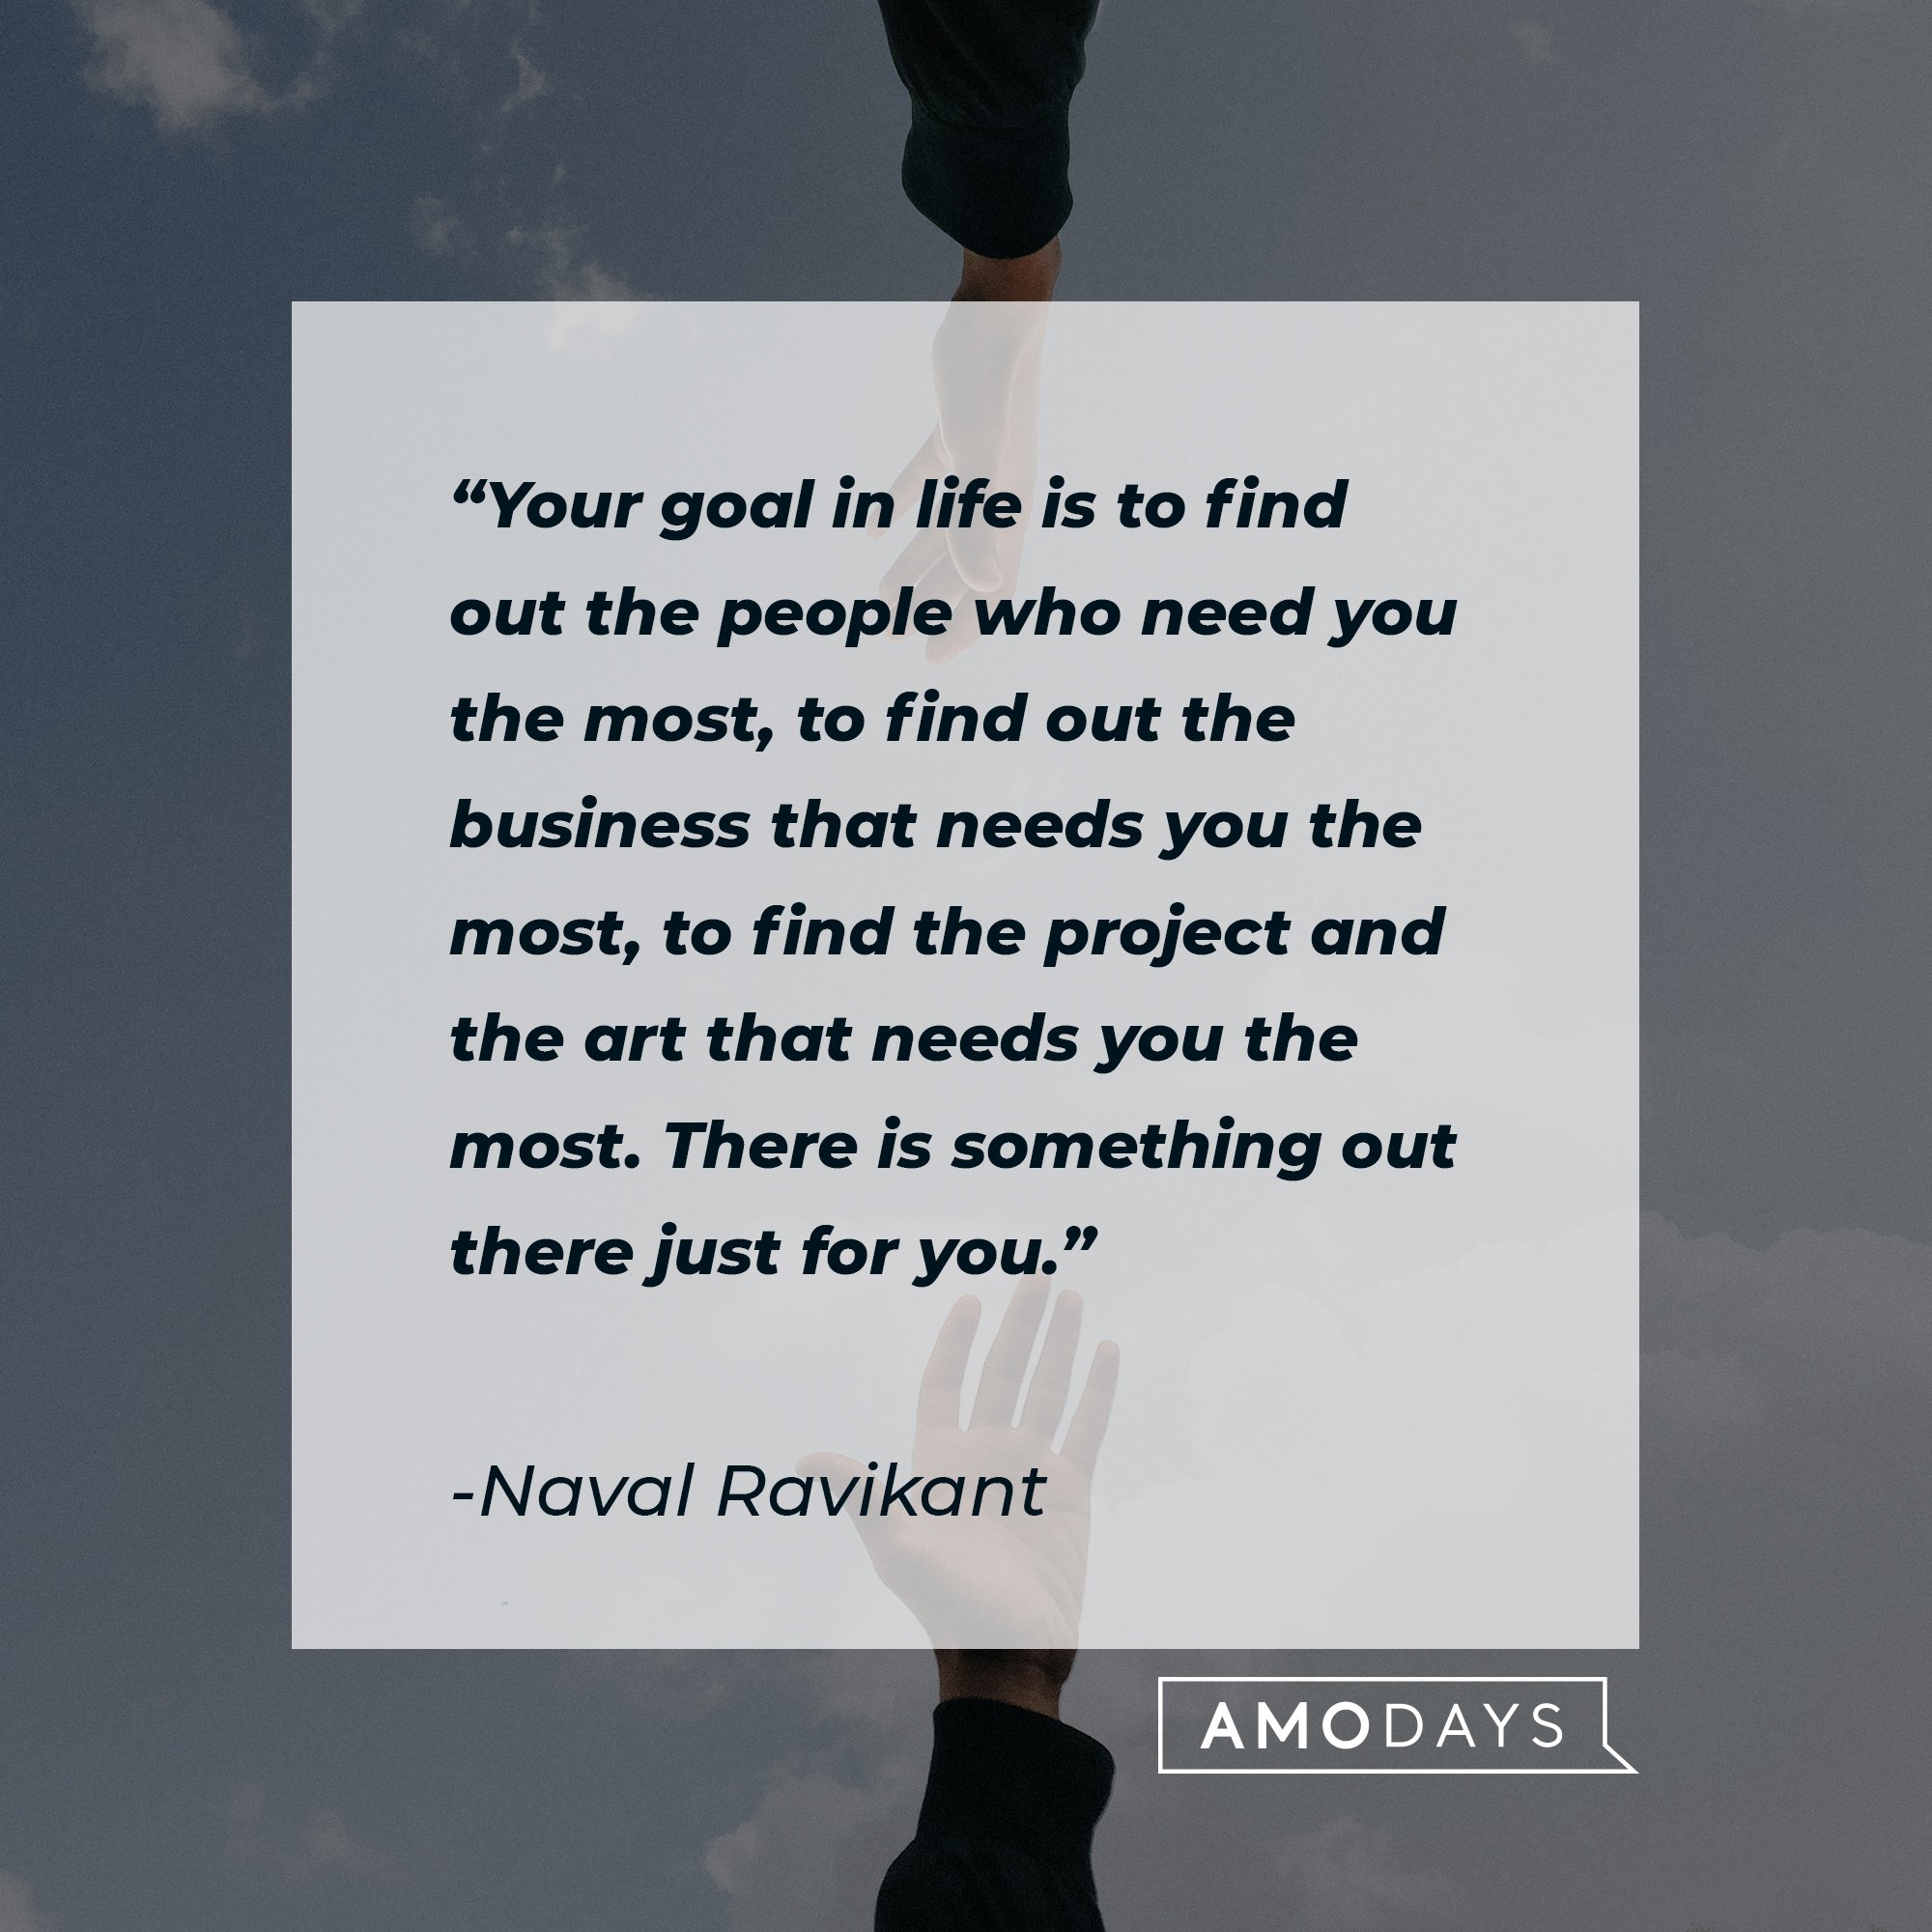  Naval Ravikant's quote: "Your goal in life is to find out the people who need you the most, to find out the business that needs you the most, to find the project and the art that needs you the most. There is something out there just for you." | Image: AmoDays